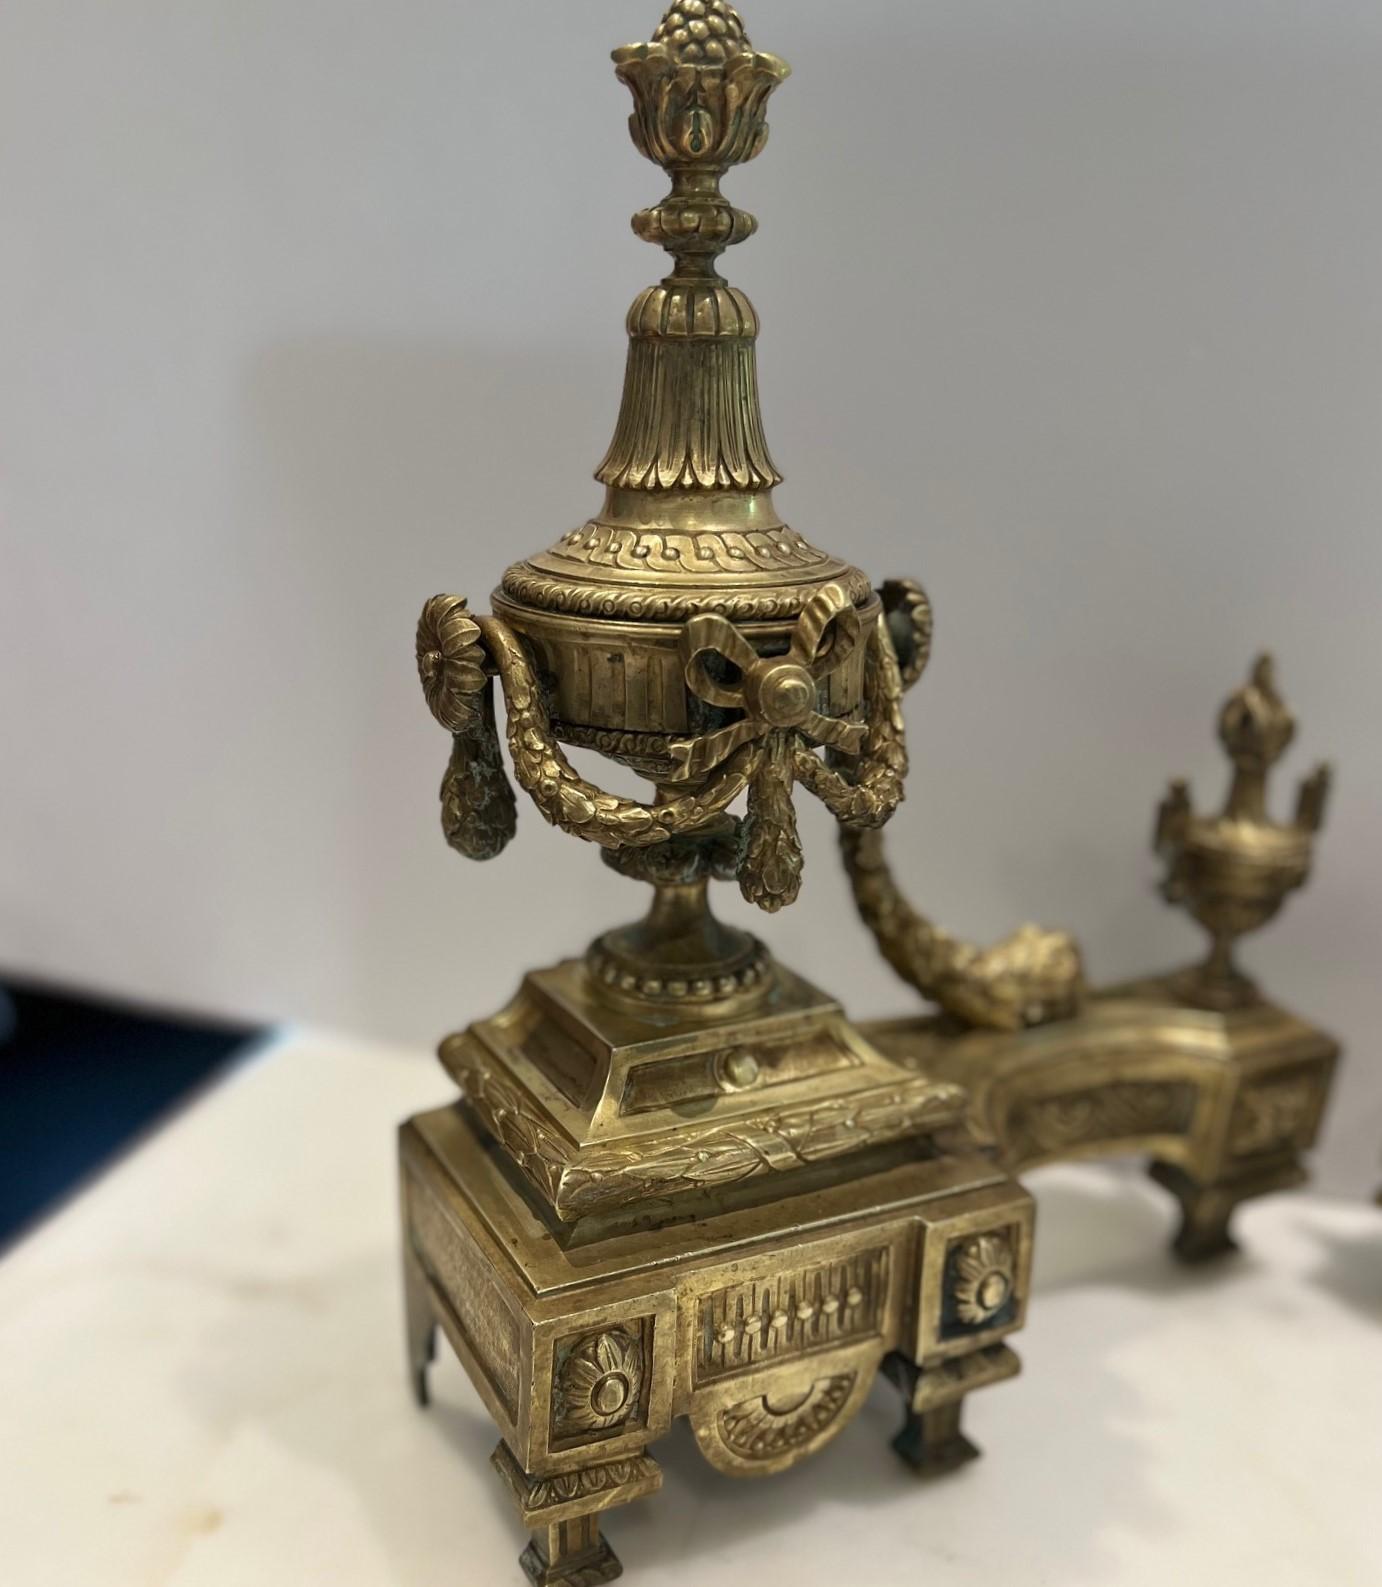 Late 19th c. France, a pair of cast gilt bronze chenets/andirons modeled as a footed urn strung with a draping laurel and topped with a bowl of piled fruit. The larger urn is stationed beside a smaller flaming urn, both on a shaped plinth cast with